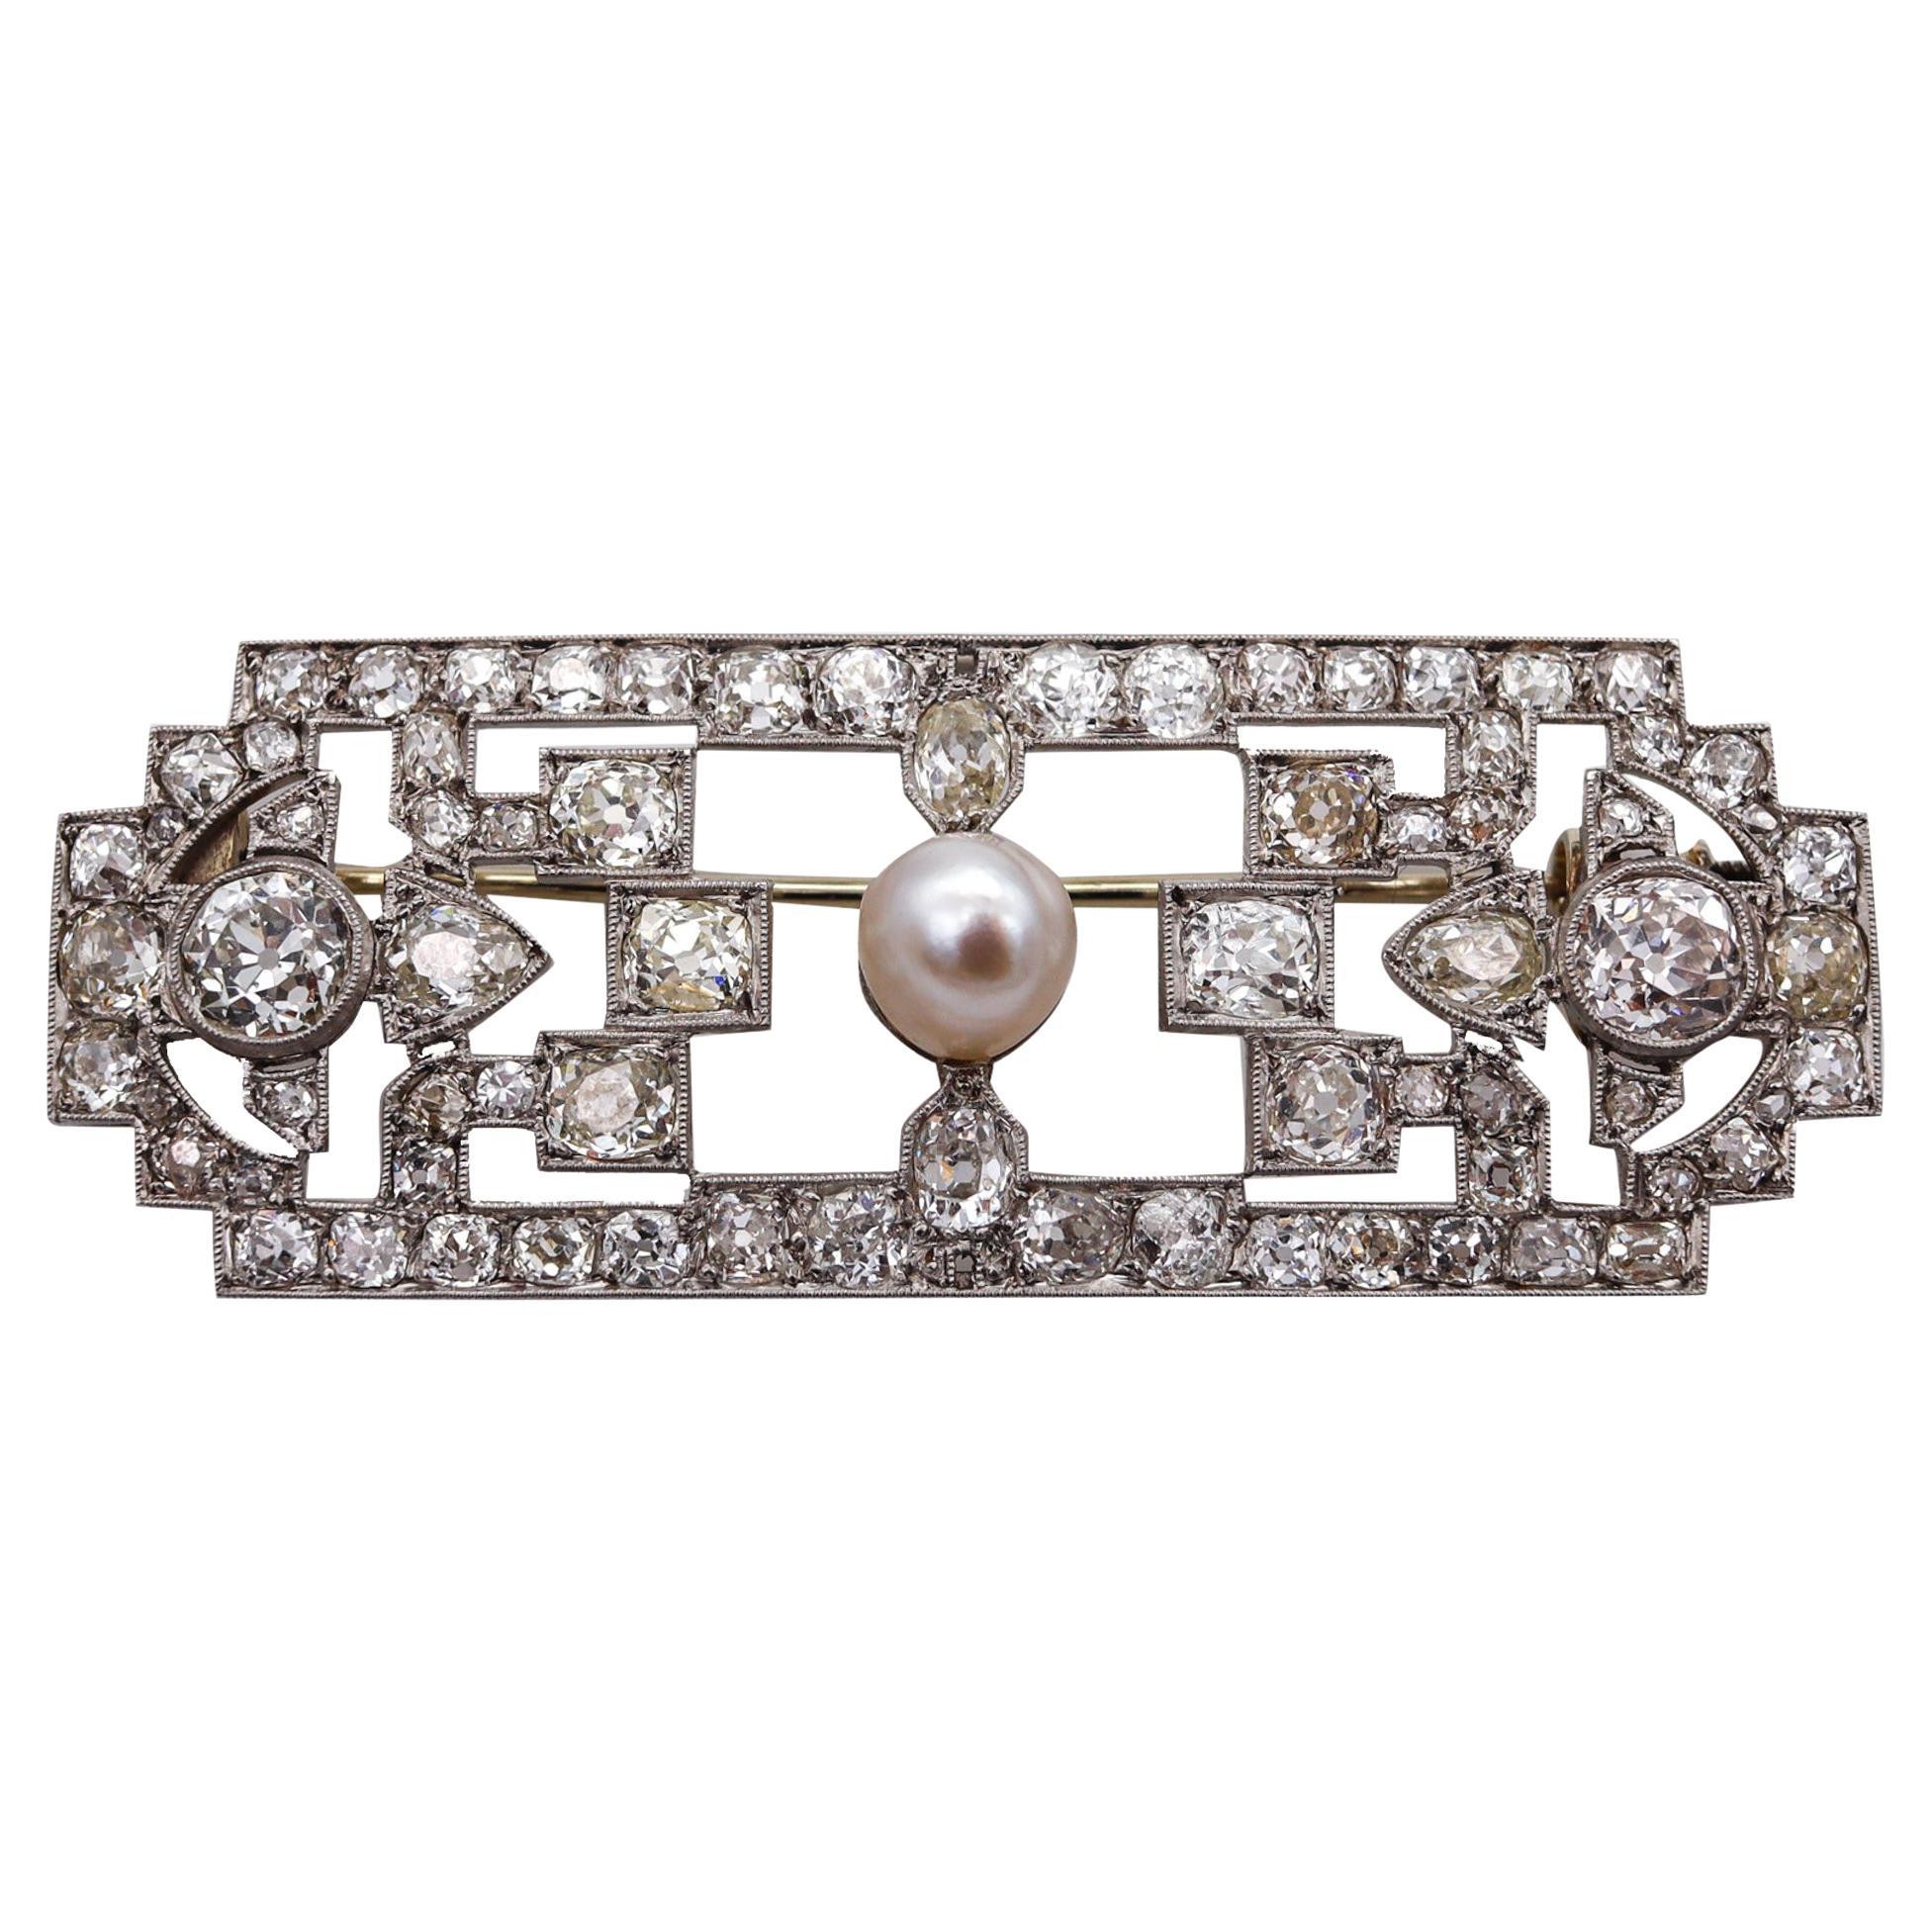 French 1920 Art Deco Geometric Brooch in Platinum with 10.70ctw in Diamonds For Sale